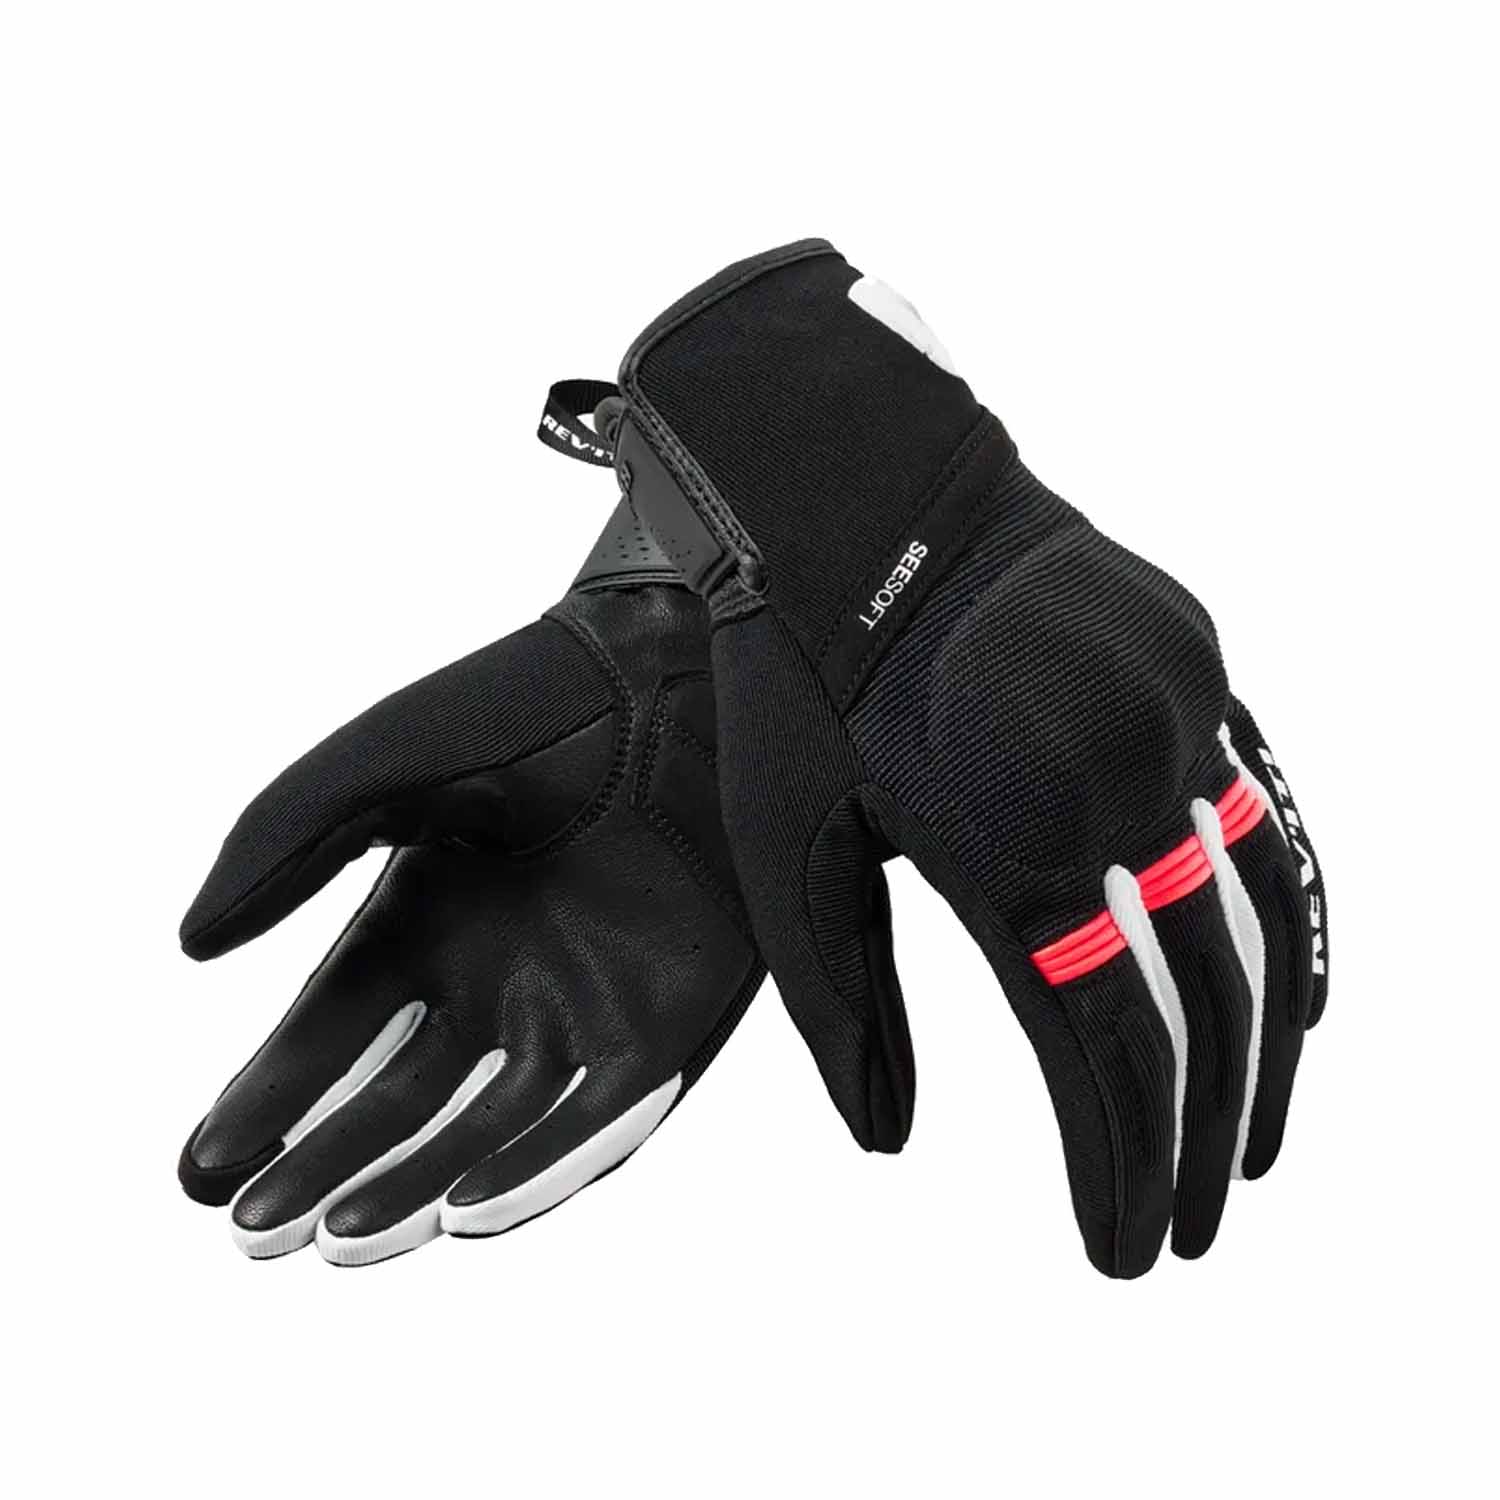 Image of EU REV'IT! Mosca 2 Ladies Gloves Black Pink Taille S